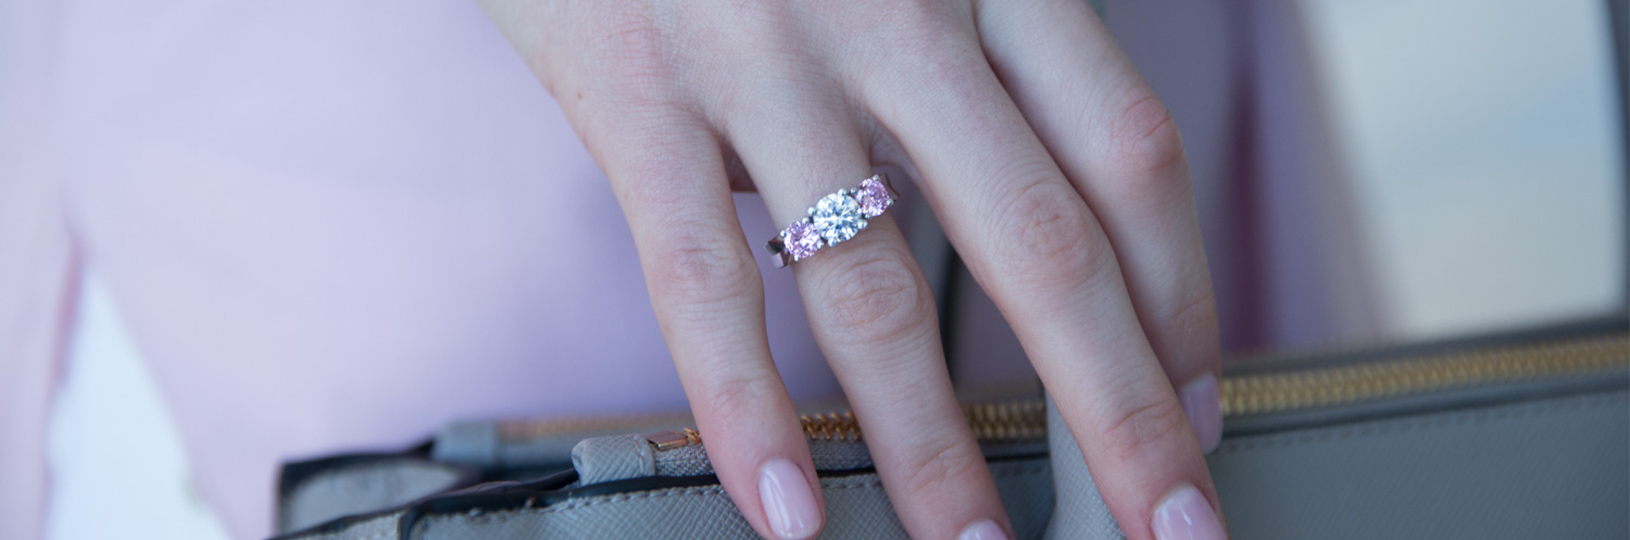 Premium Photo | Jewelry ring on a woman's finger